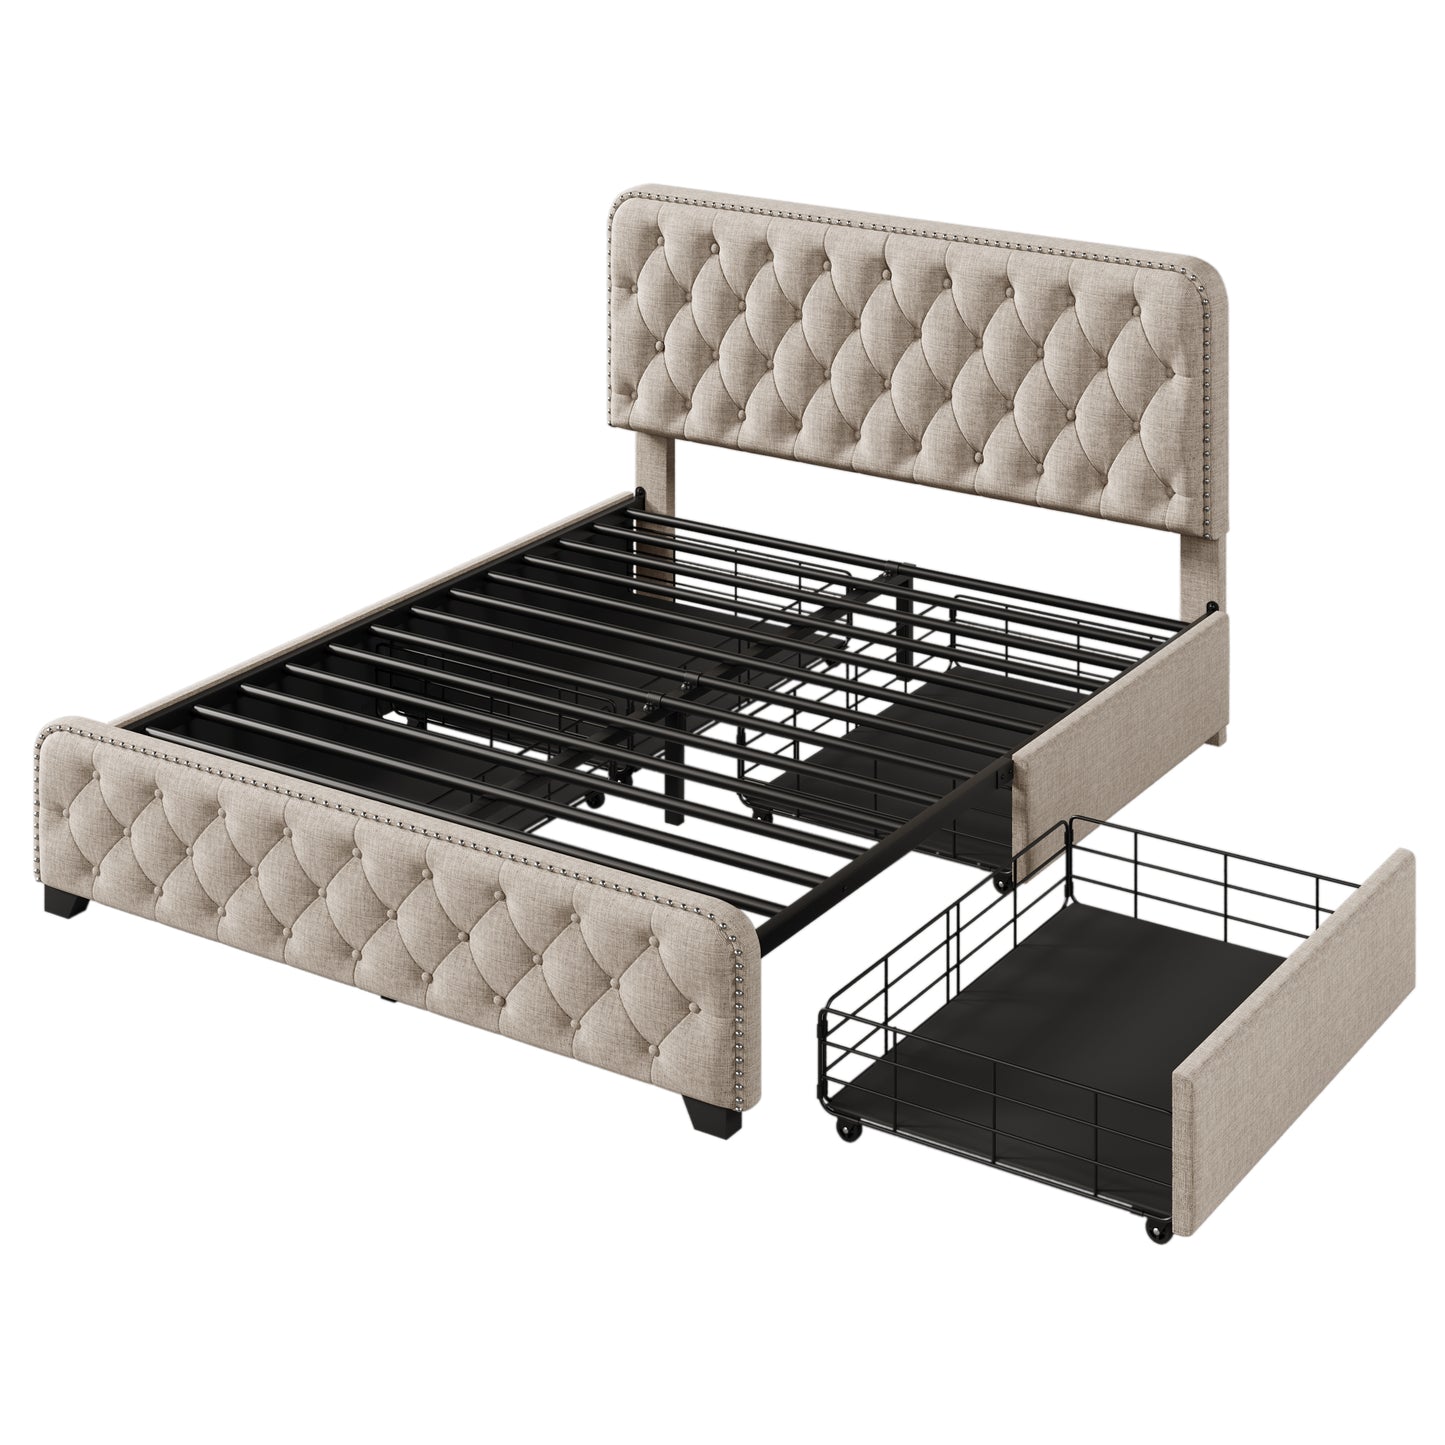 Queen Size, Upholstered Platform Bed Frame with Four Drawers, Button Tufted Headboard and Footboard Sturdy Metal Support, No Box Spring Required.